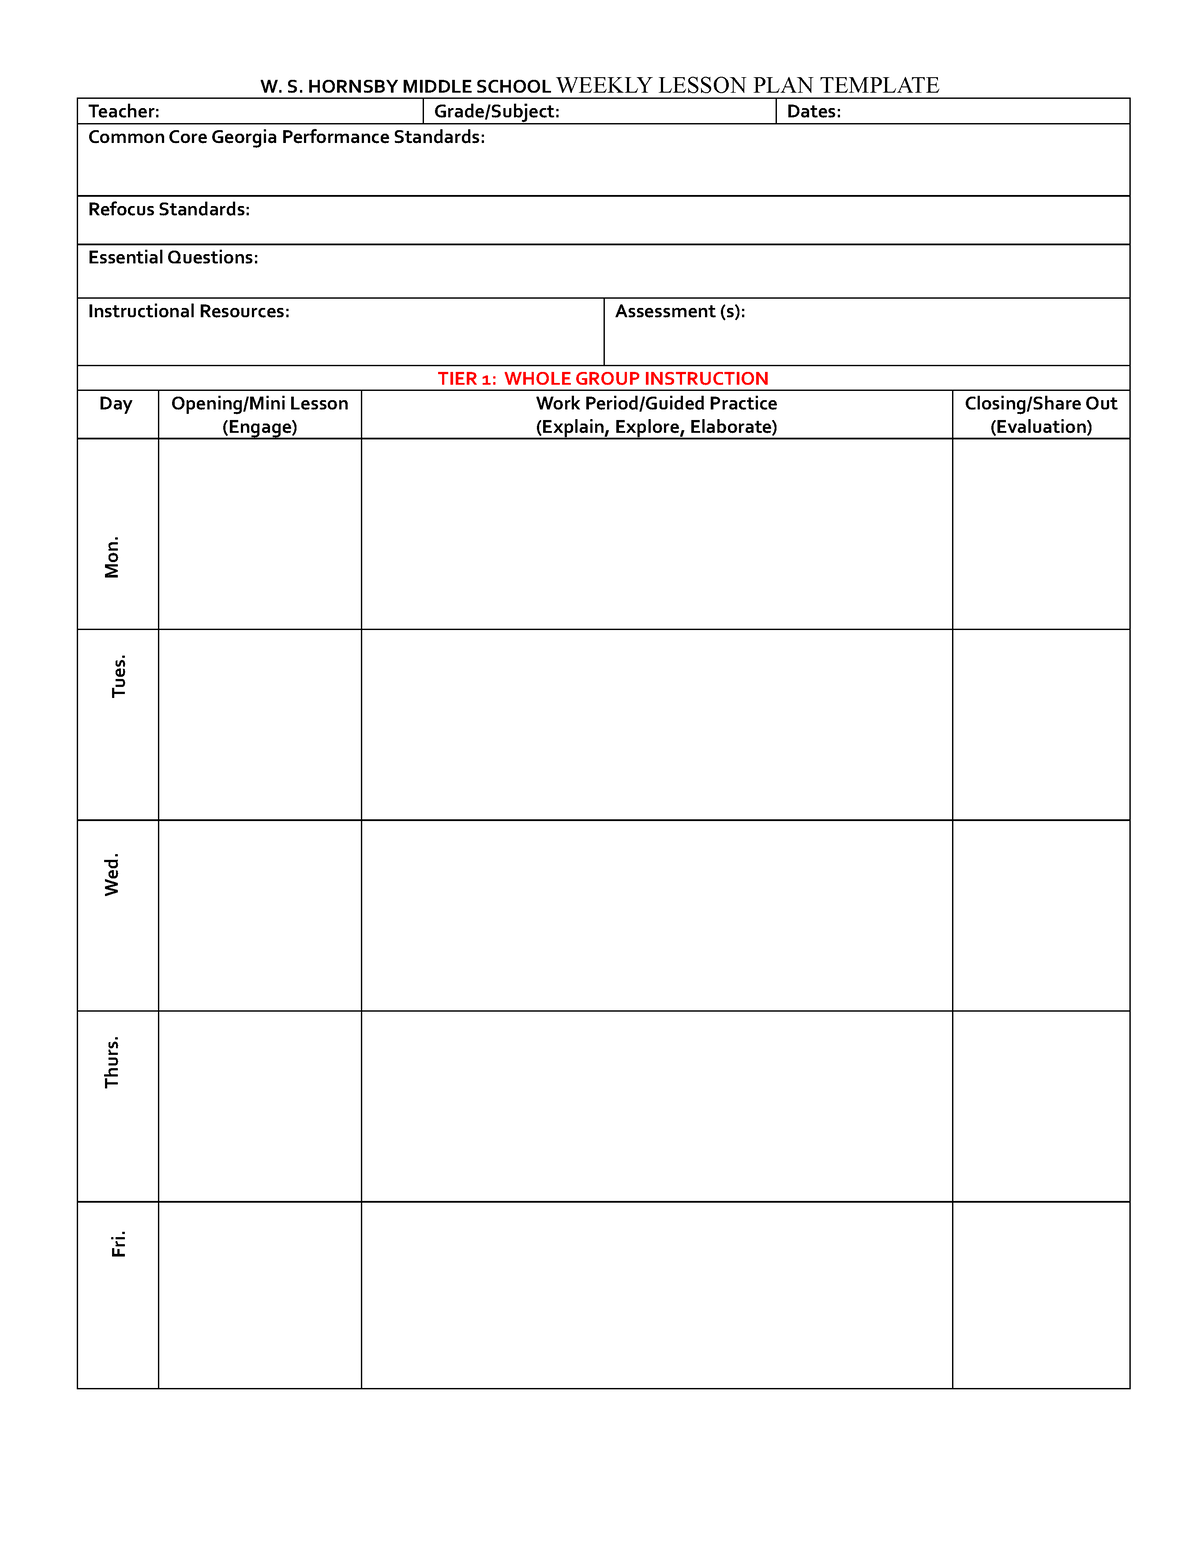 Hornsby Lesson Plan Template new - W. S. HORNSBY MIDDLE SCHOOL WEEKLY ...